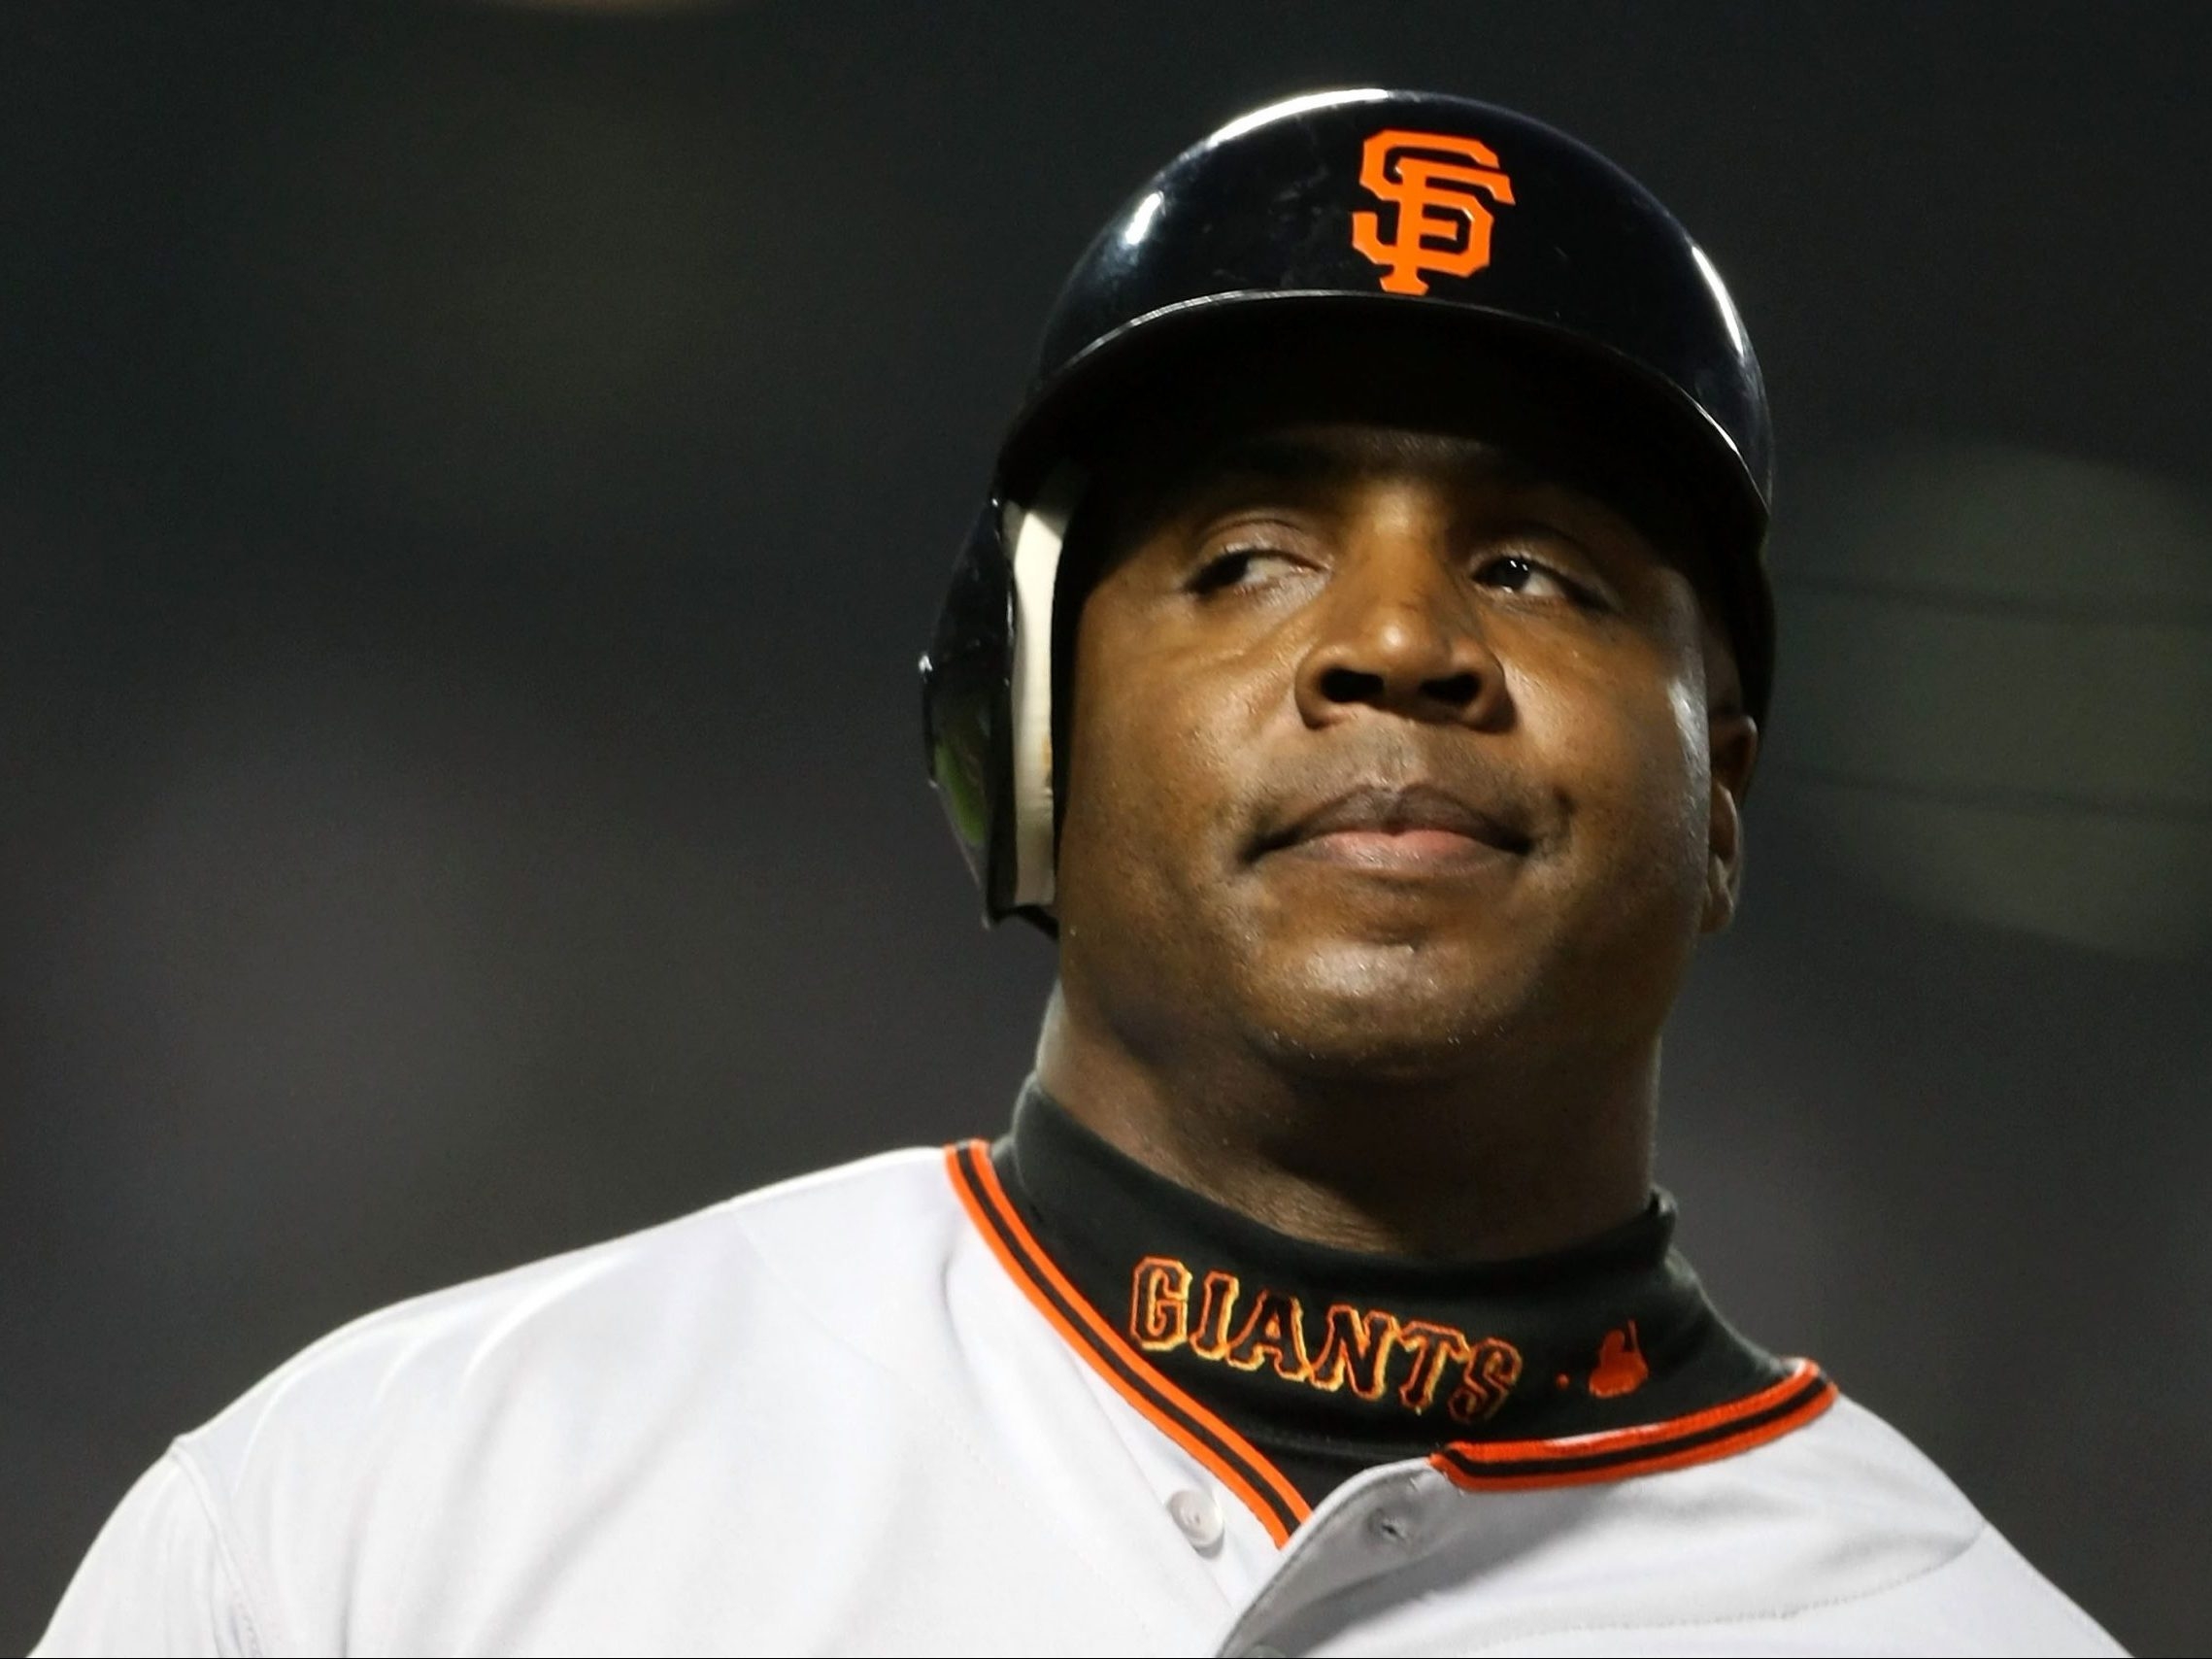 Last inning Barry Bonds, Roger Clemens face final shot at Cooperstown